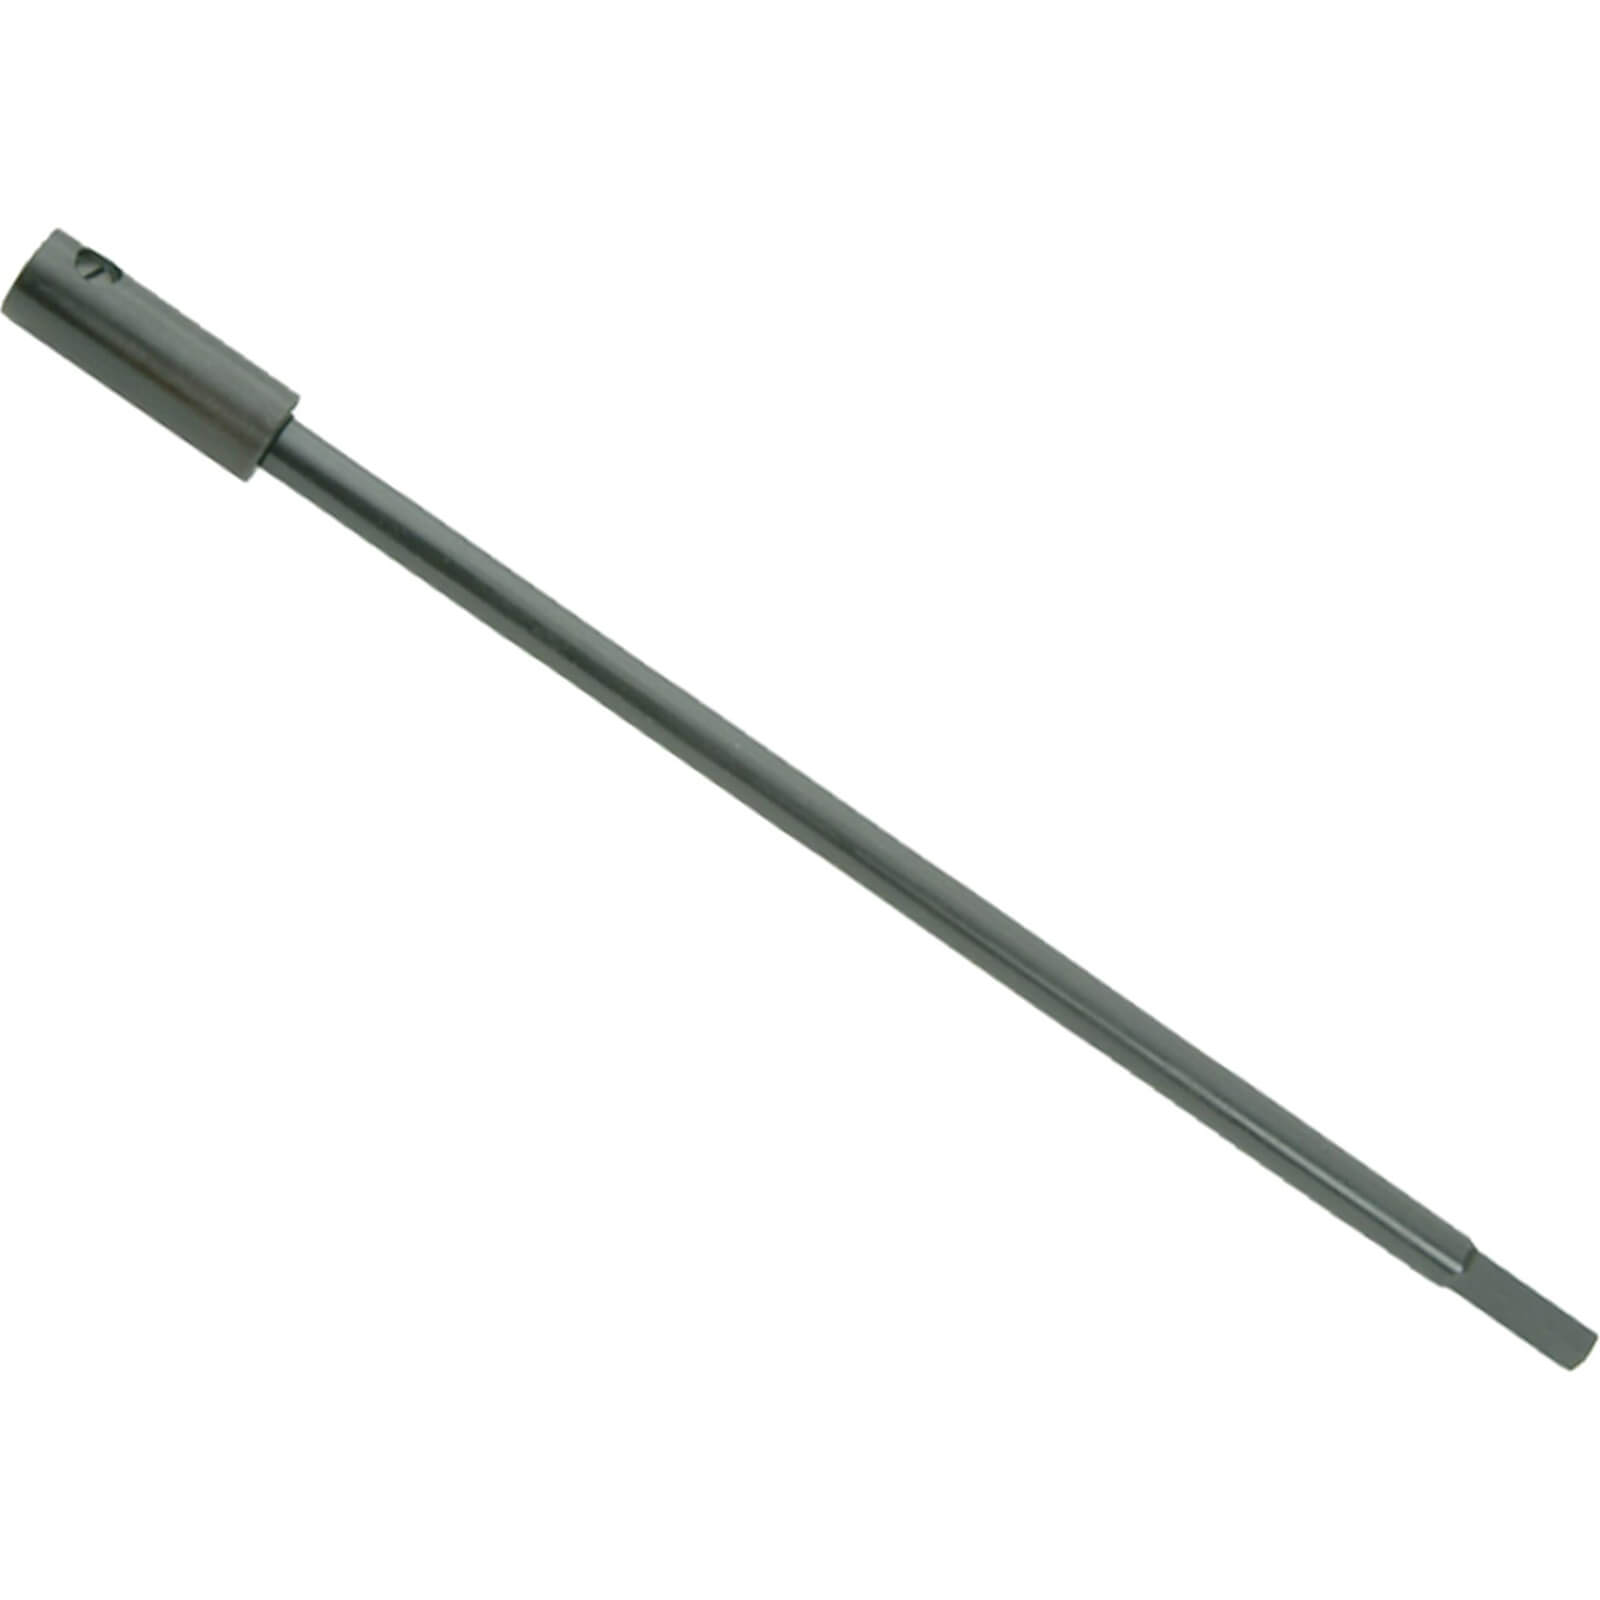 Photo of Starrett A15 9.5mm Shank Hole Saw Arbor Extension